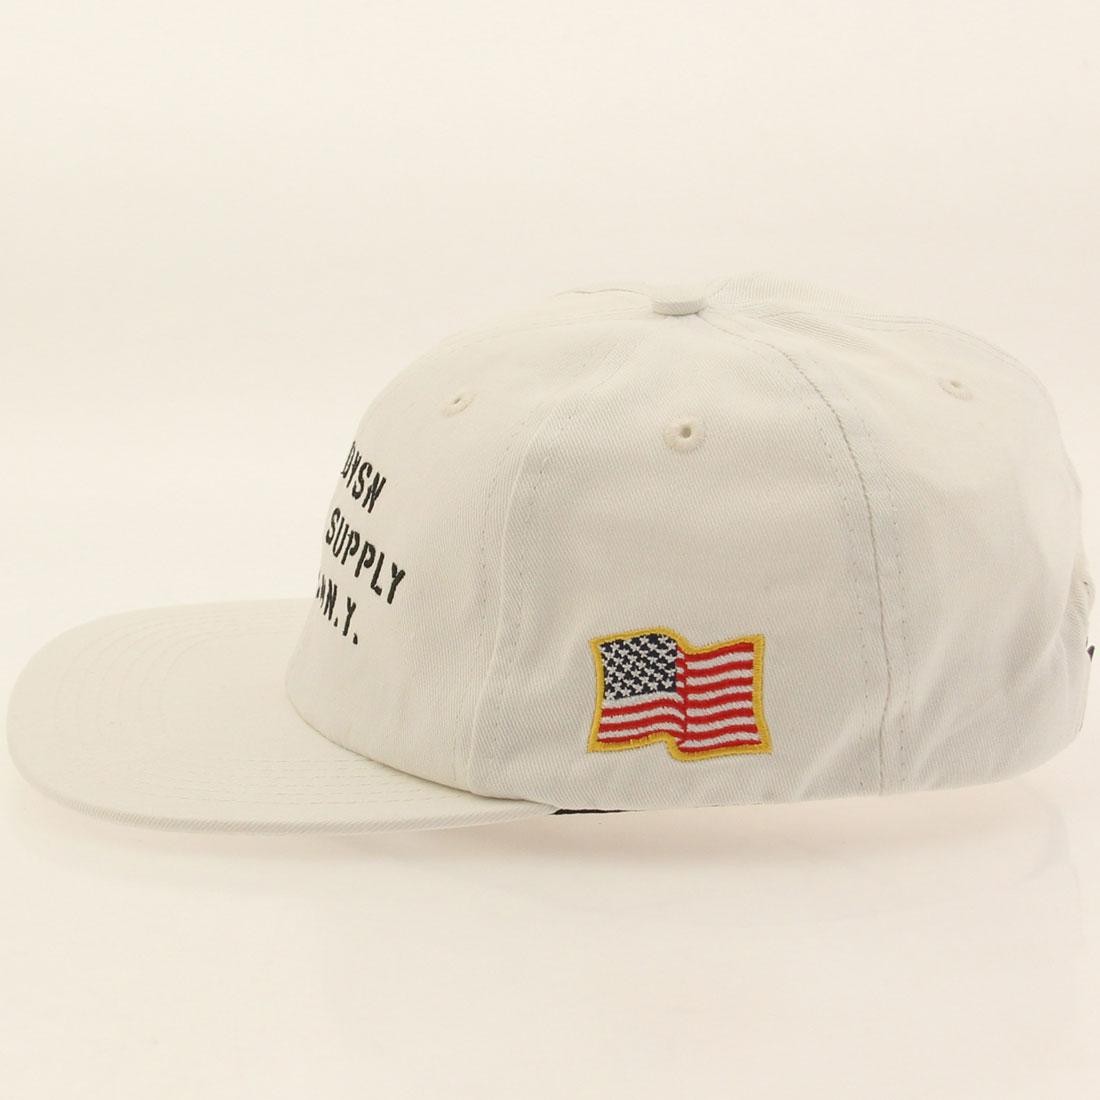 10 Deep Stenciled Snapback Cap white off white